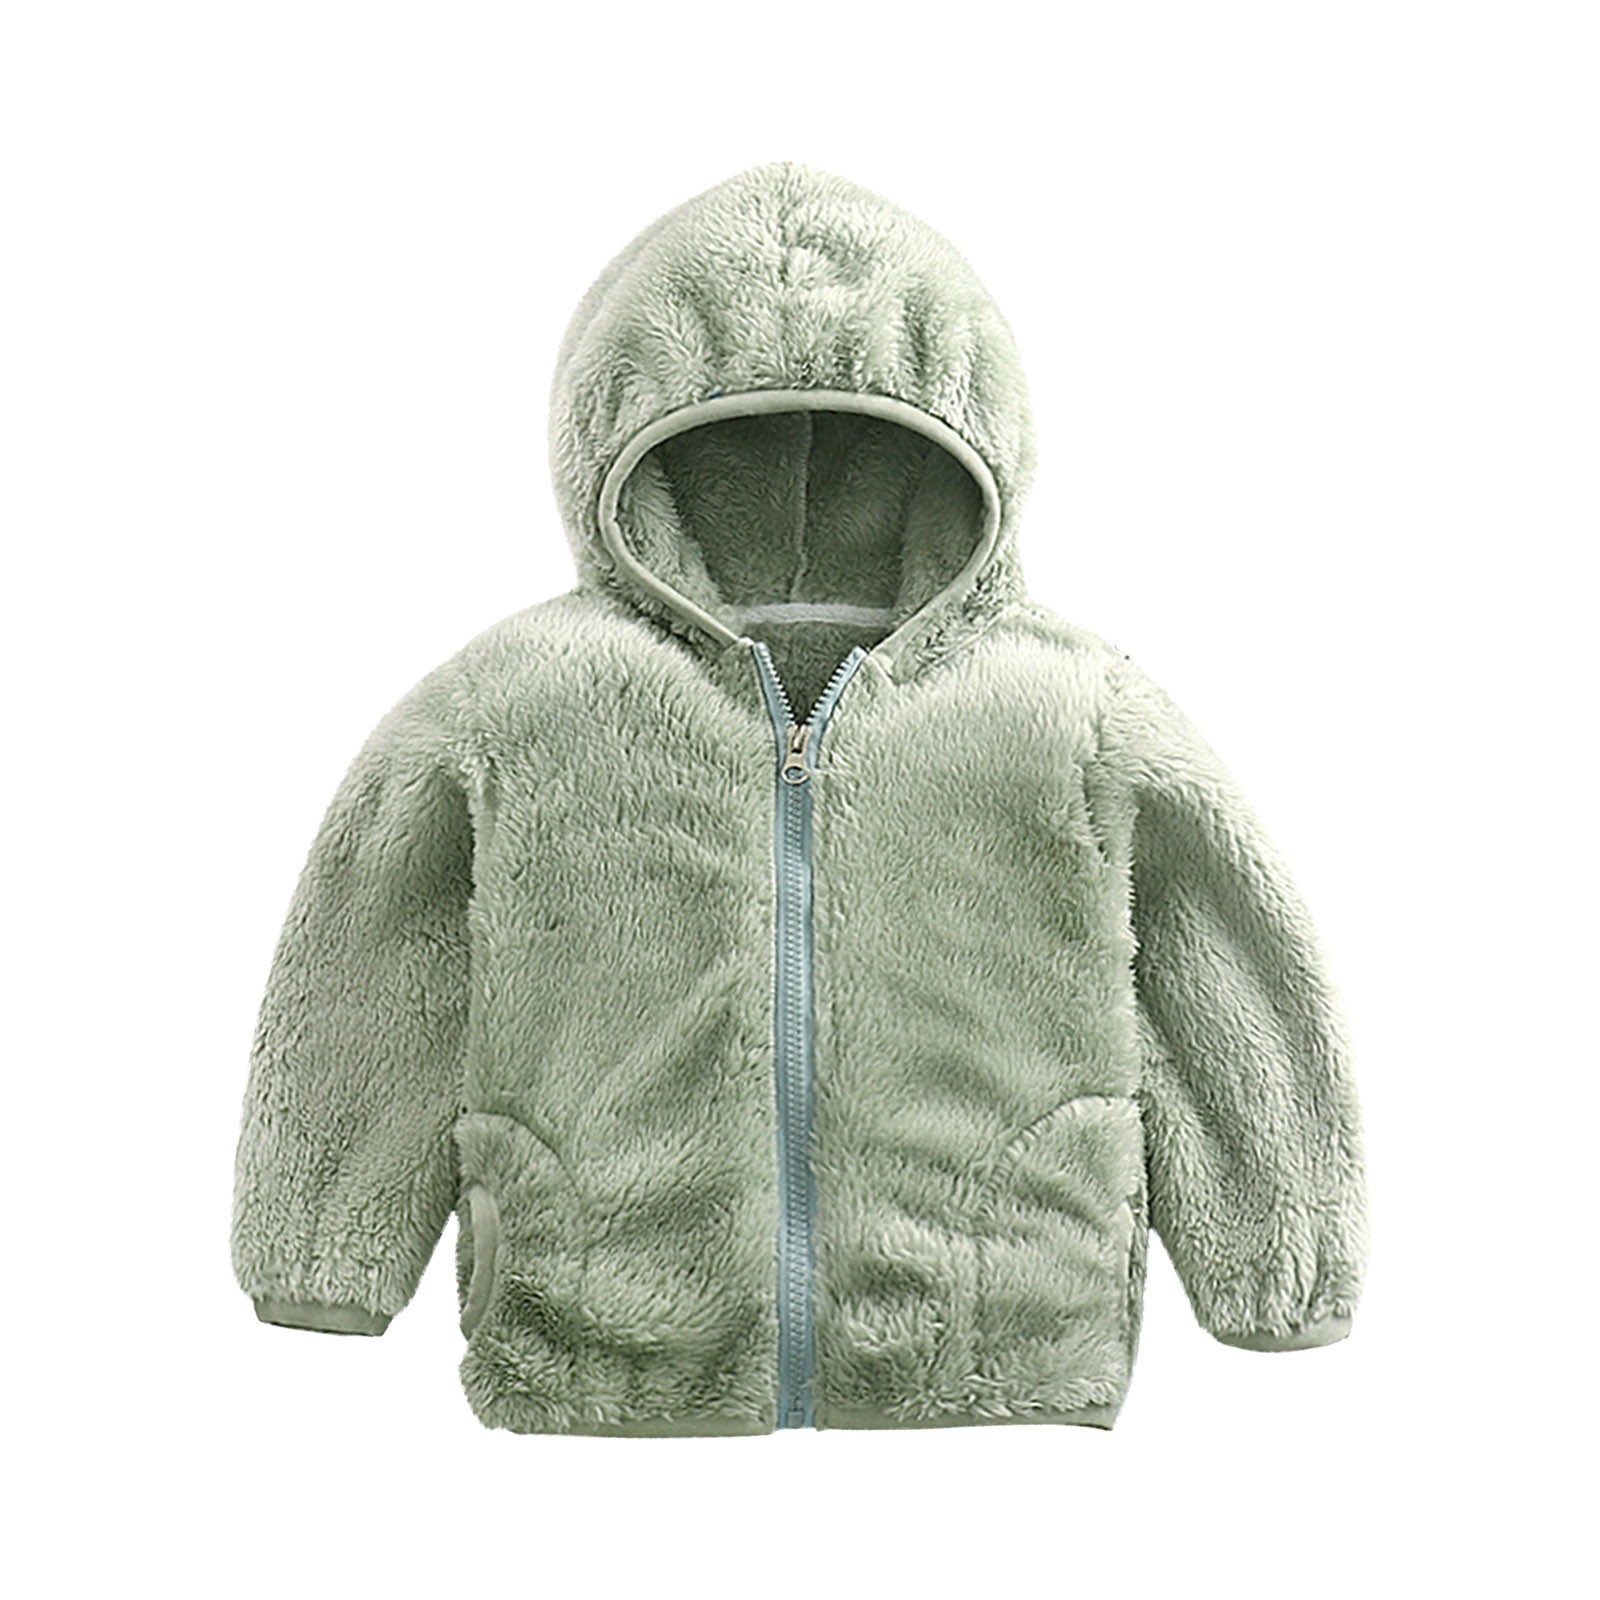 Dezsed Toddler Fleece Jacket Clearance Toddler Baby Boys Girls Solid Color Plush Cute Winter Keep Warm Hoodie Coat Jacket 6-7 Years Green - image 1 of 6